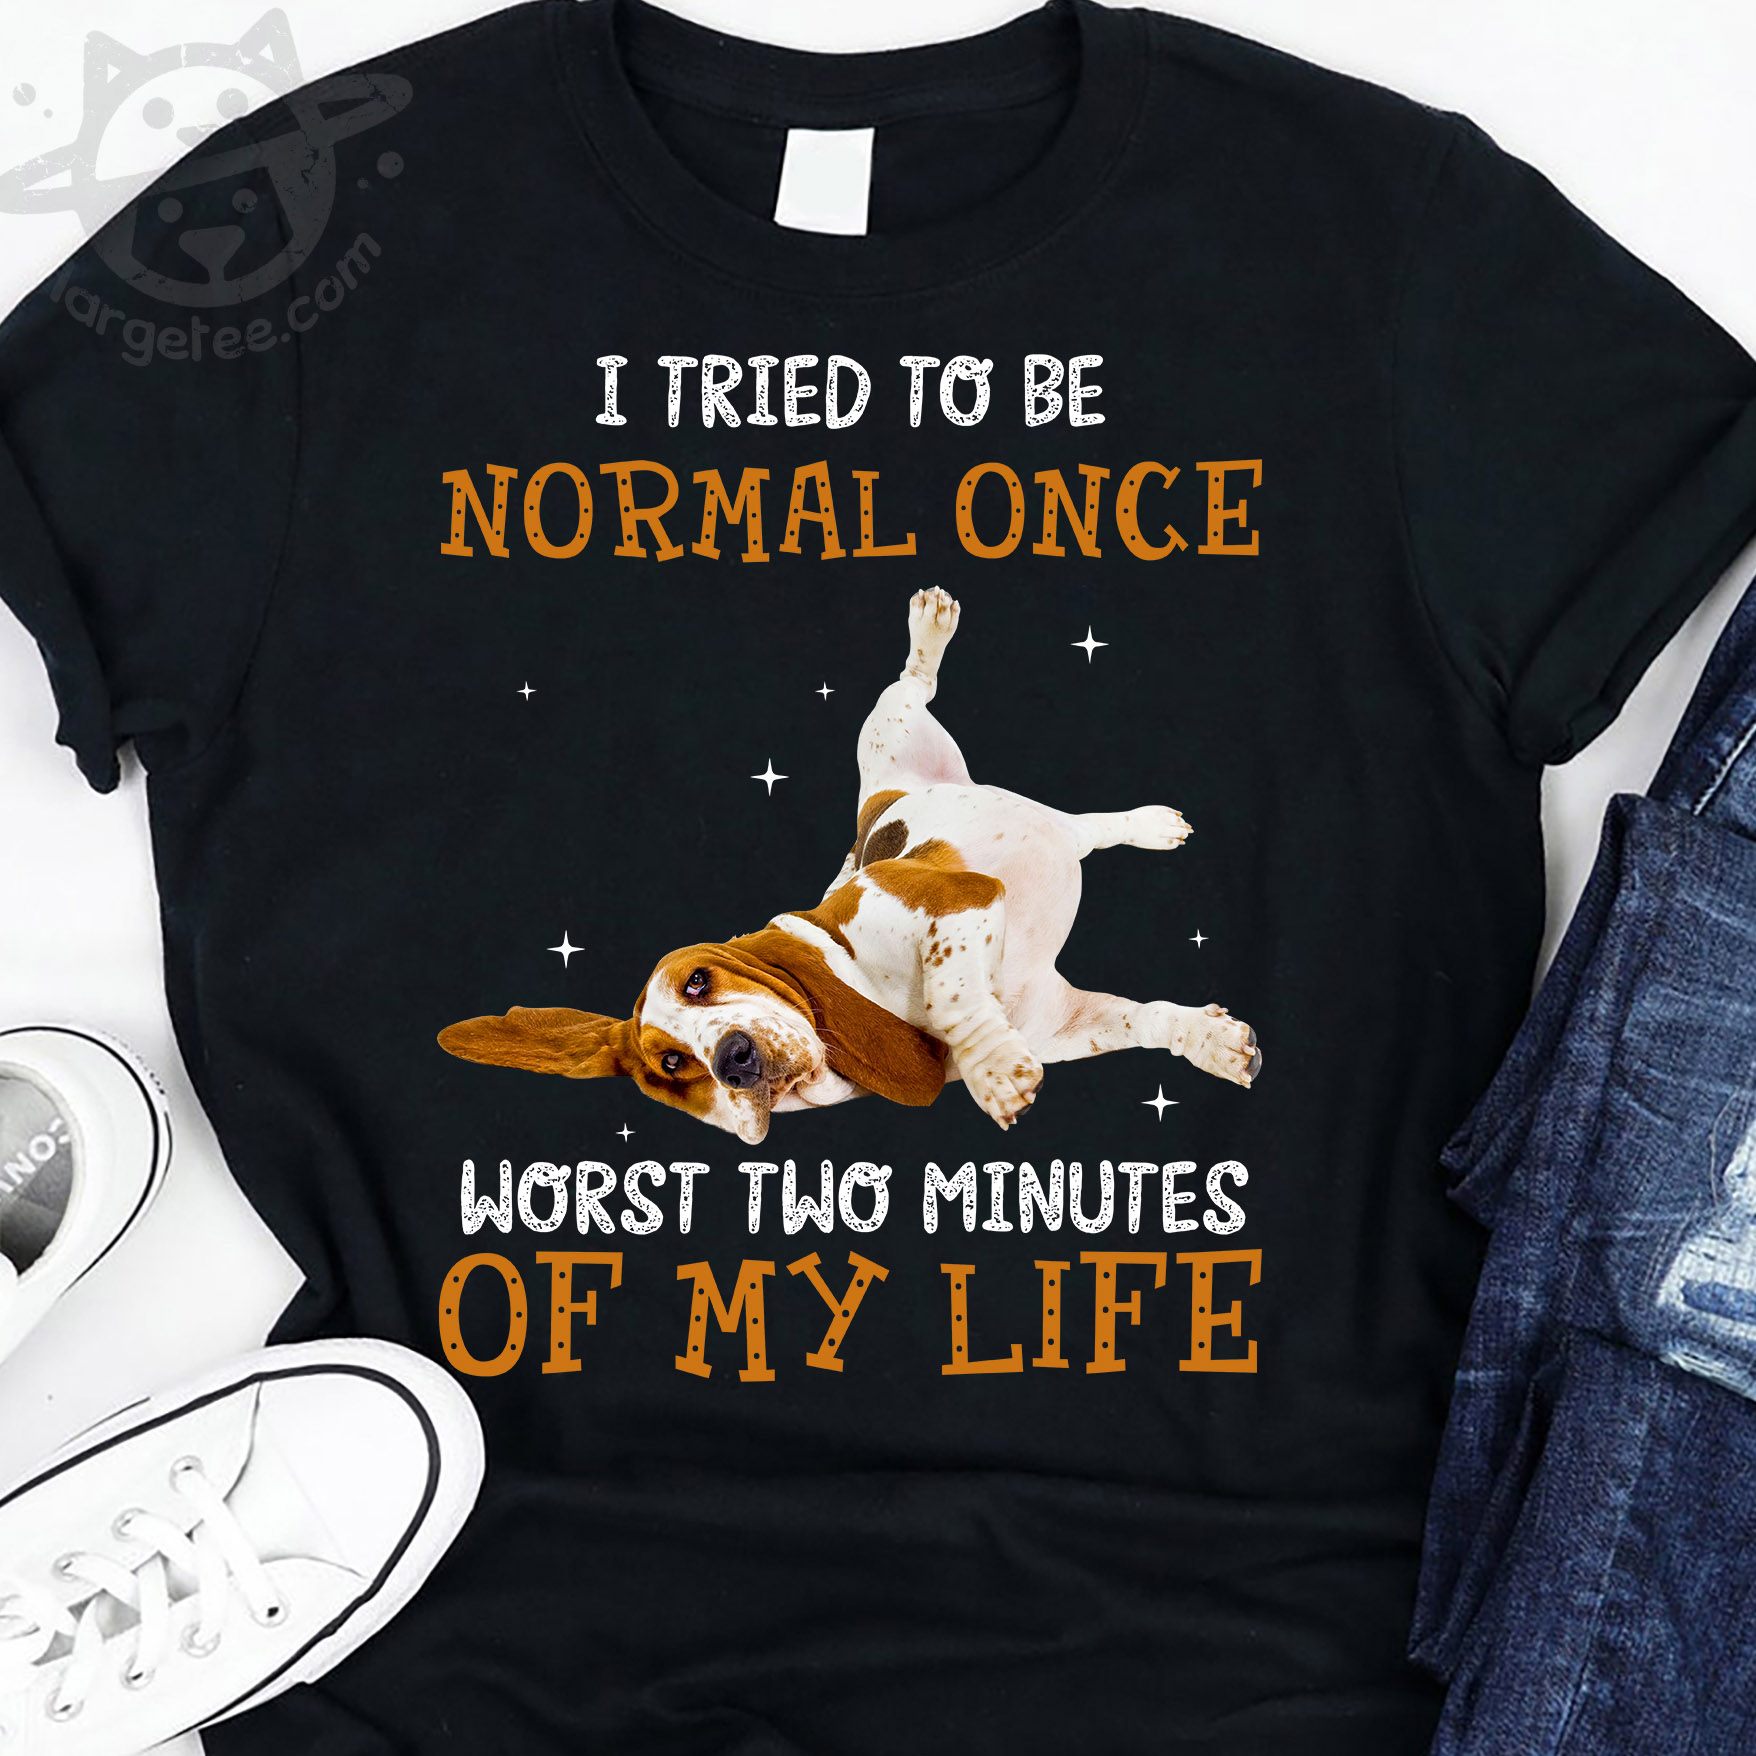 I tried to be normal once - Basset hound dog